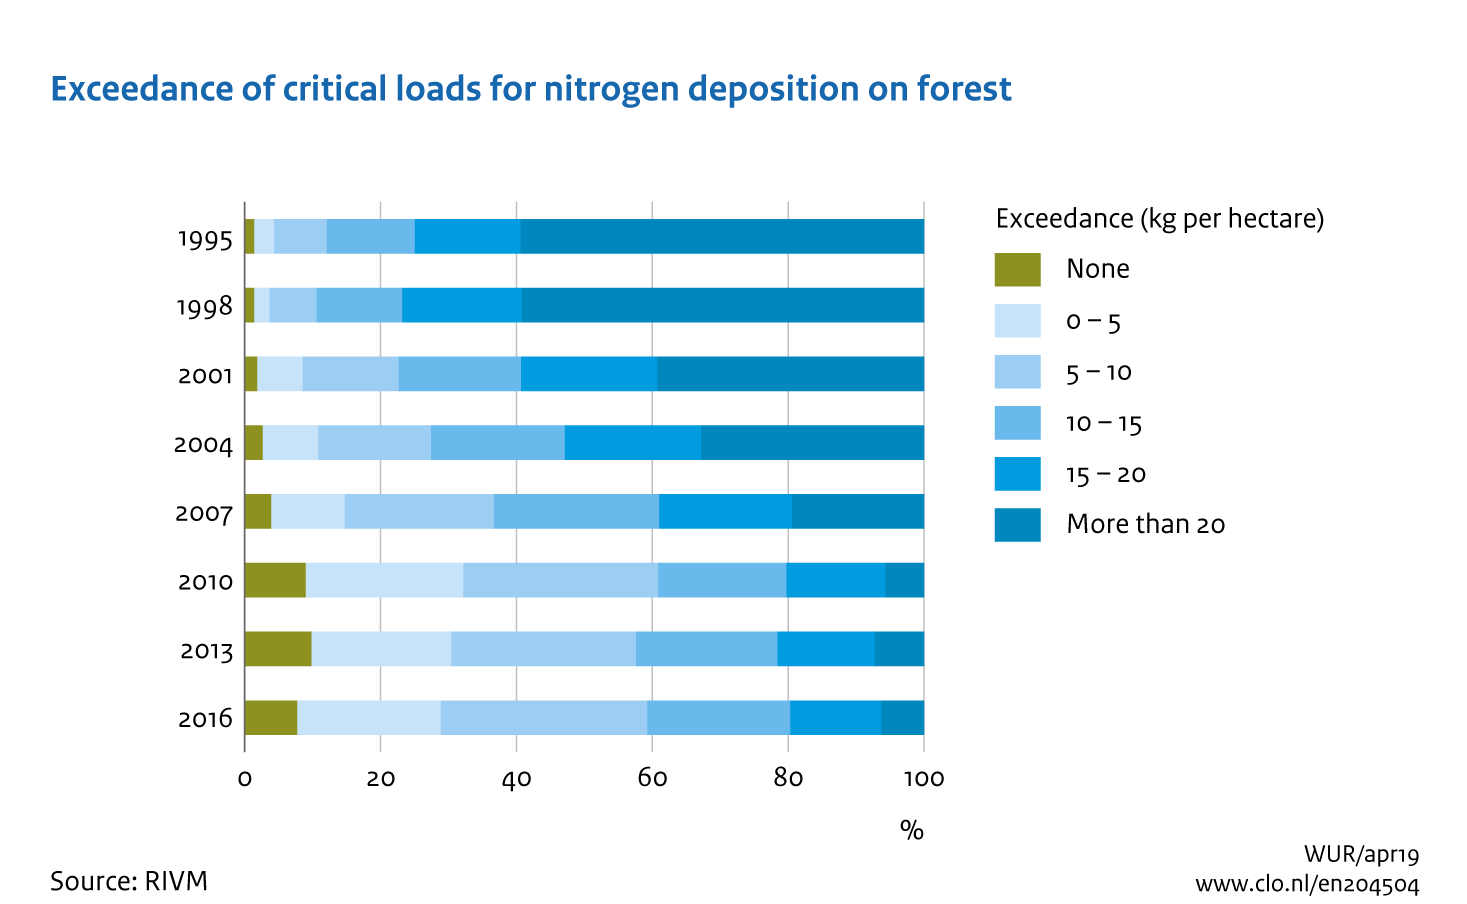 Image Exceedance of critical loads for nitrogen deposition on forest . The image is further explained in the text.